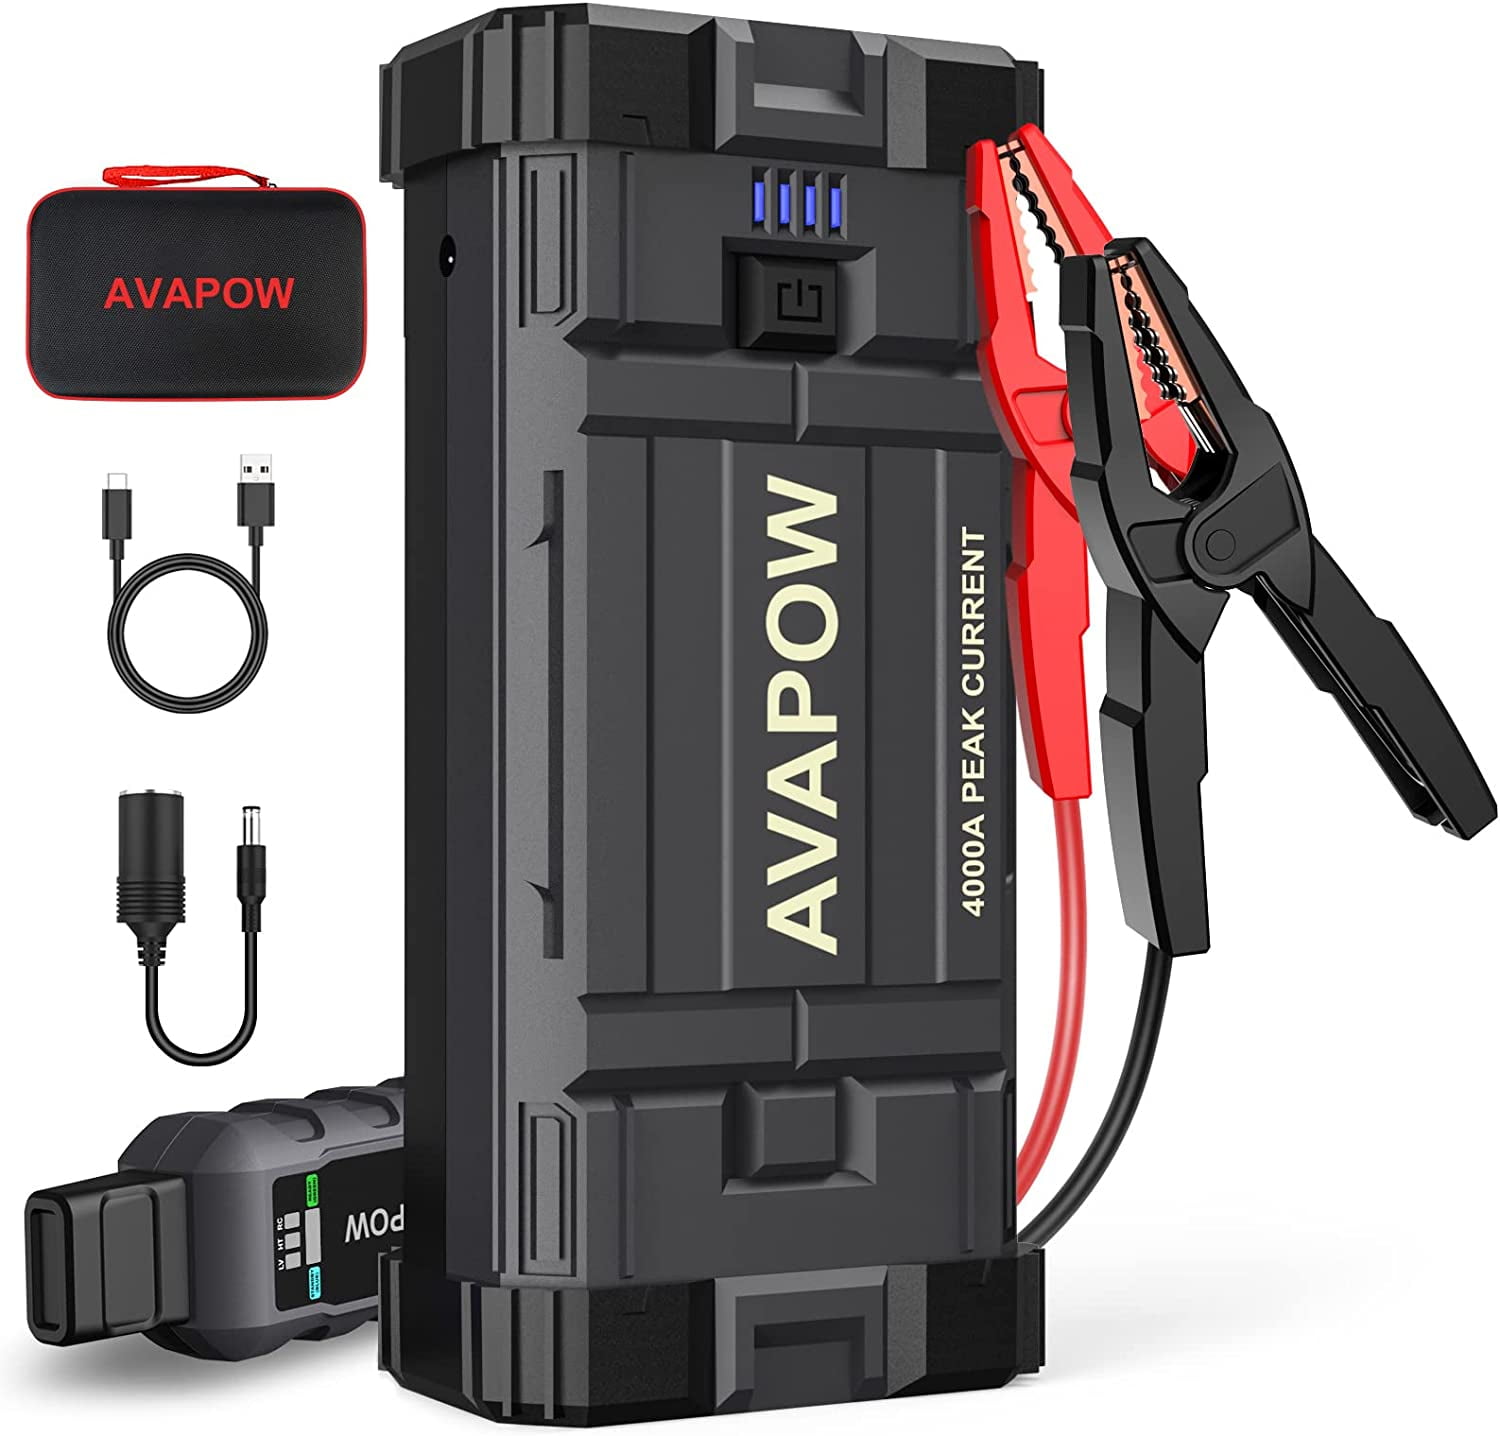 AVAPOW Car Jump Starter, 4000A 27800mAh Battery Jump Starter All Gas or Up 10L Diesel), Battery Booster Power Pack, 12V Auto Jump Box with LED Light, USB Quick Charge 3.0 - Walmart.com